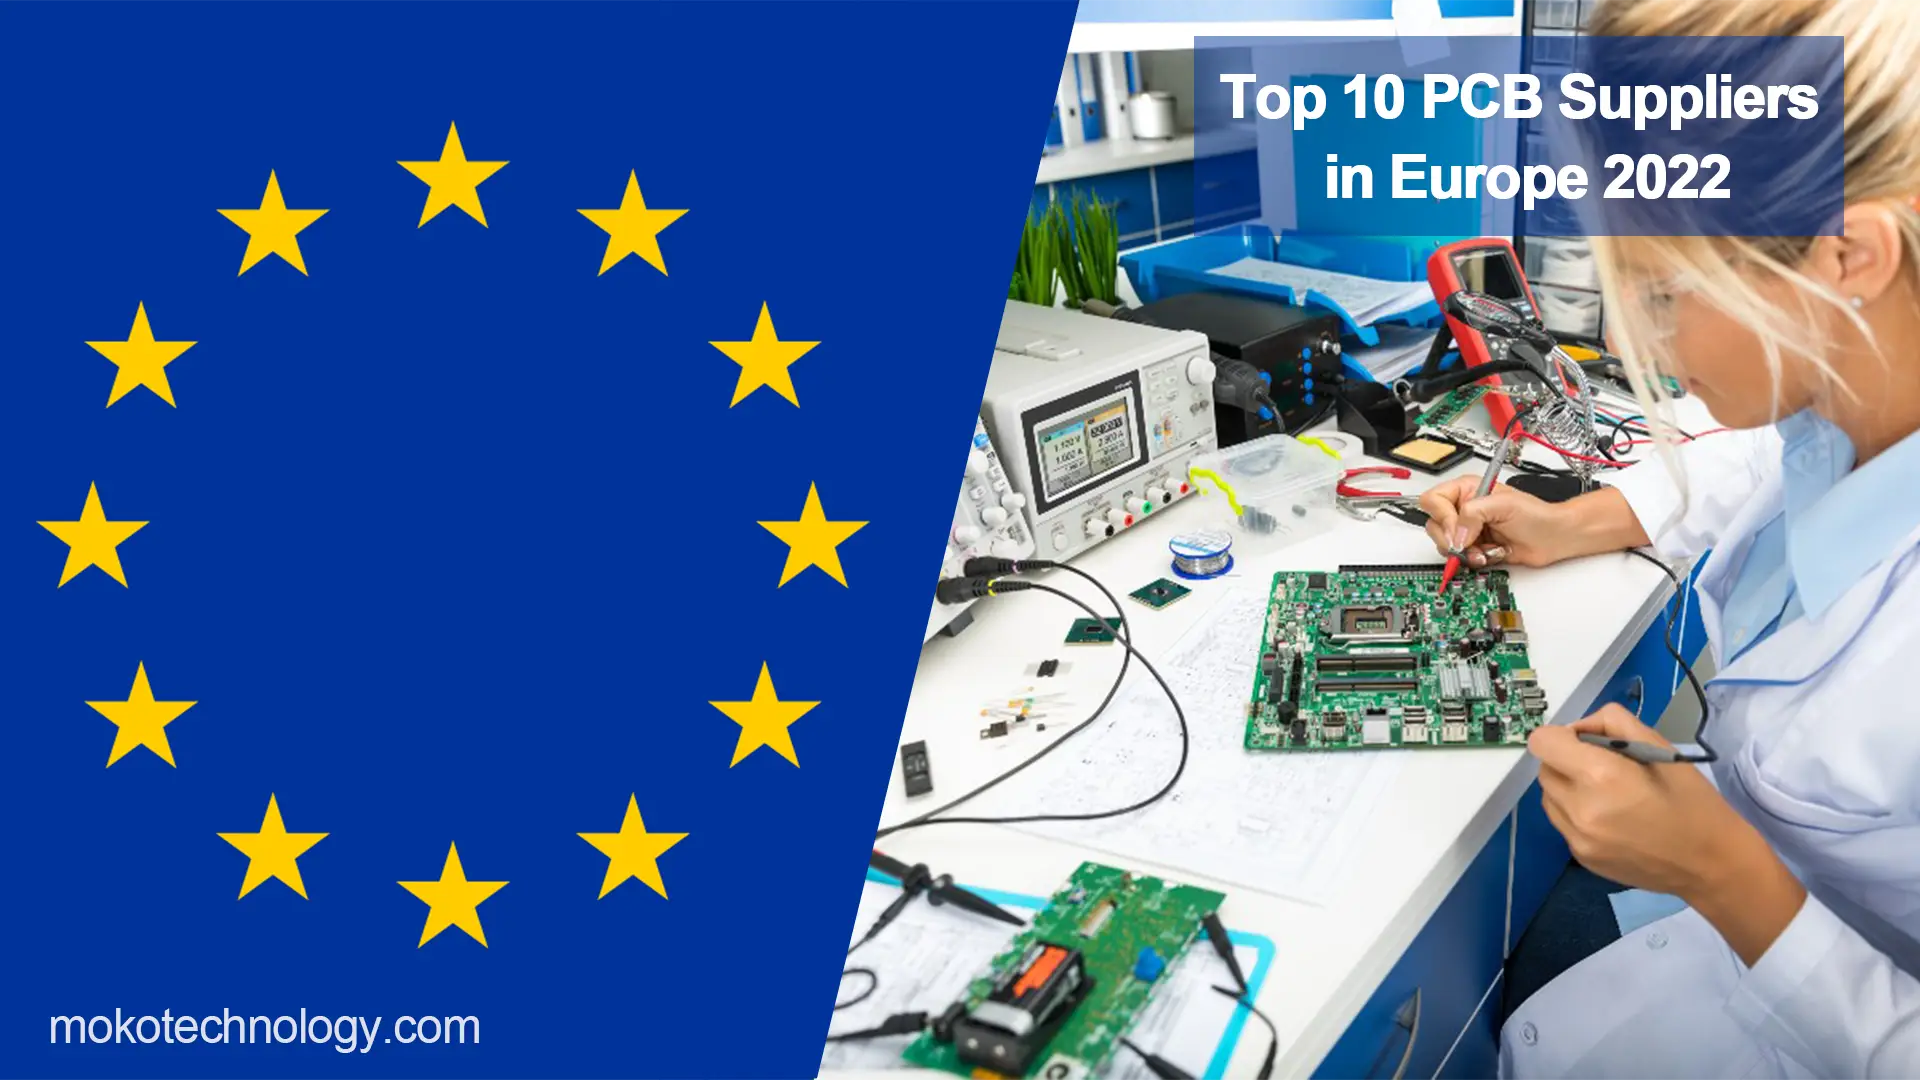 Top 10 PCB Suppliers in Europe 2022